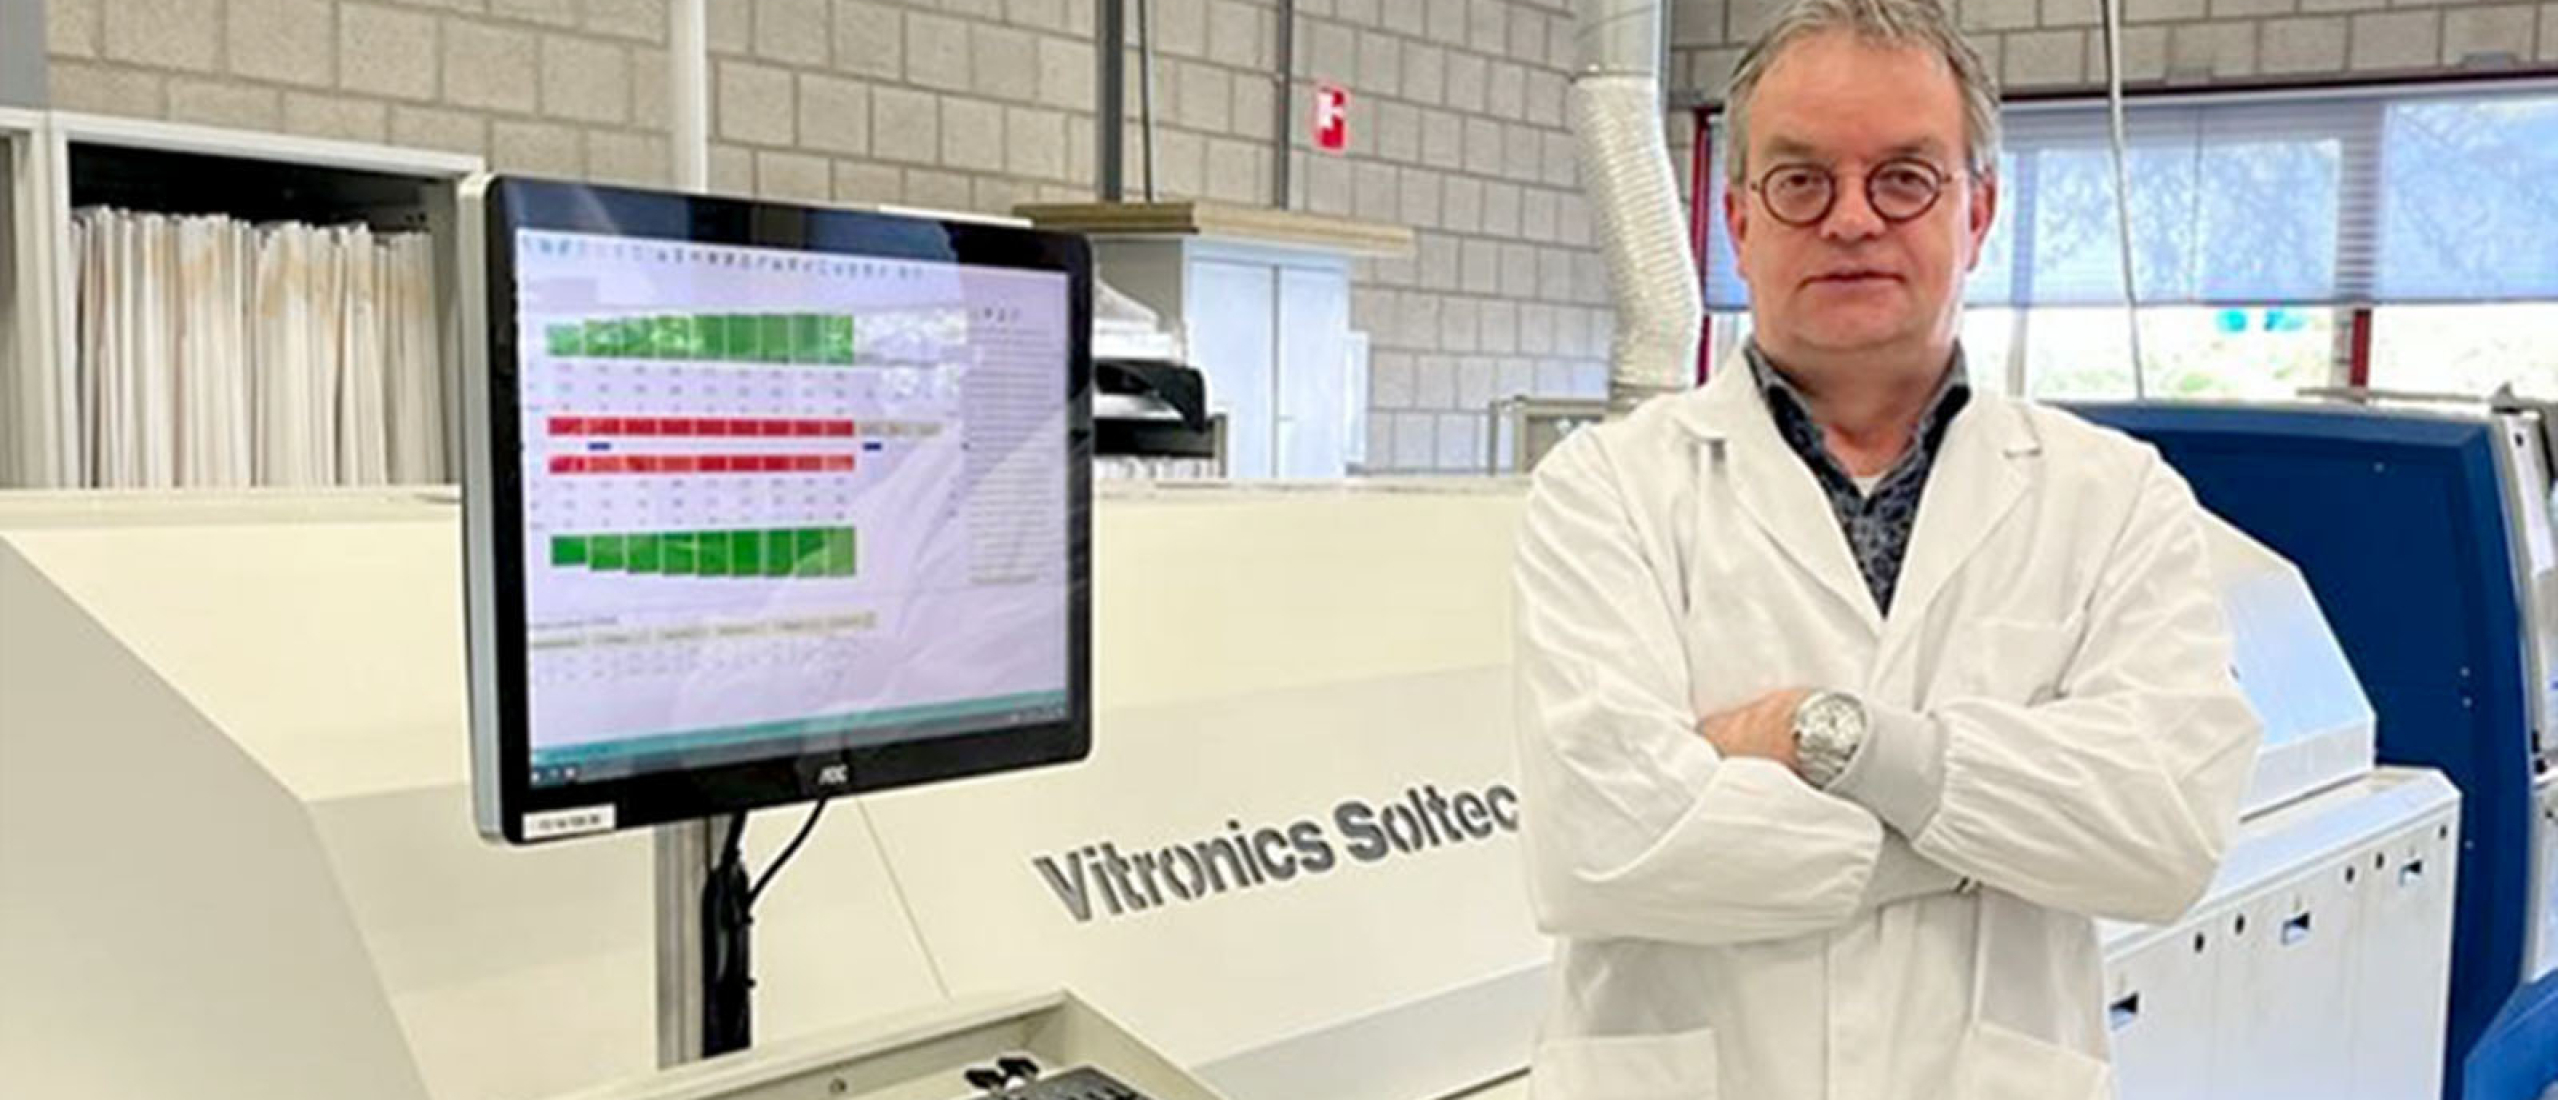 30th Vitronics Soltec Centurion Reflow oven in the Benelux sold to Batenburg